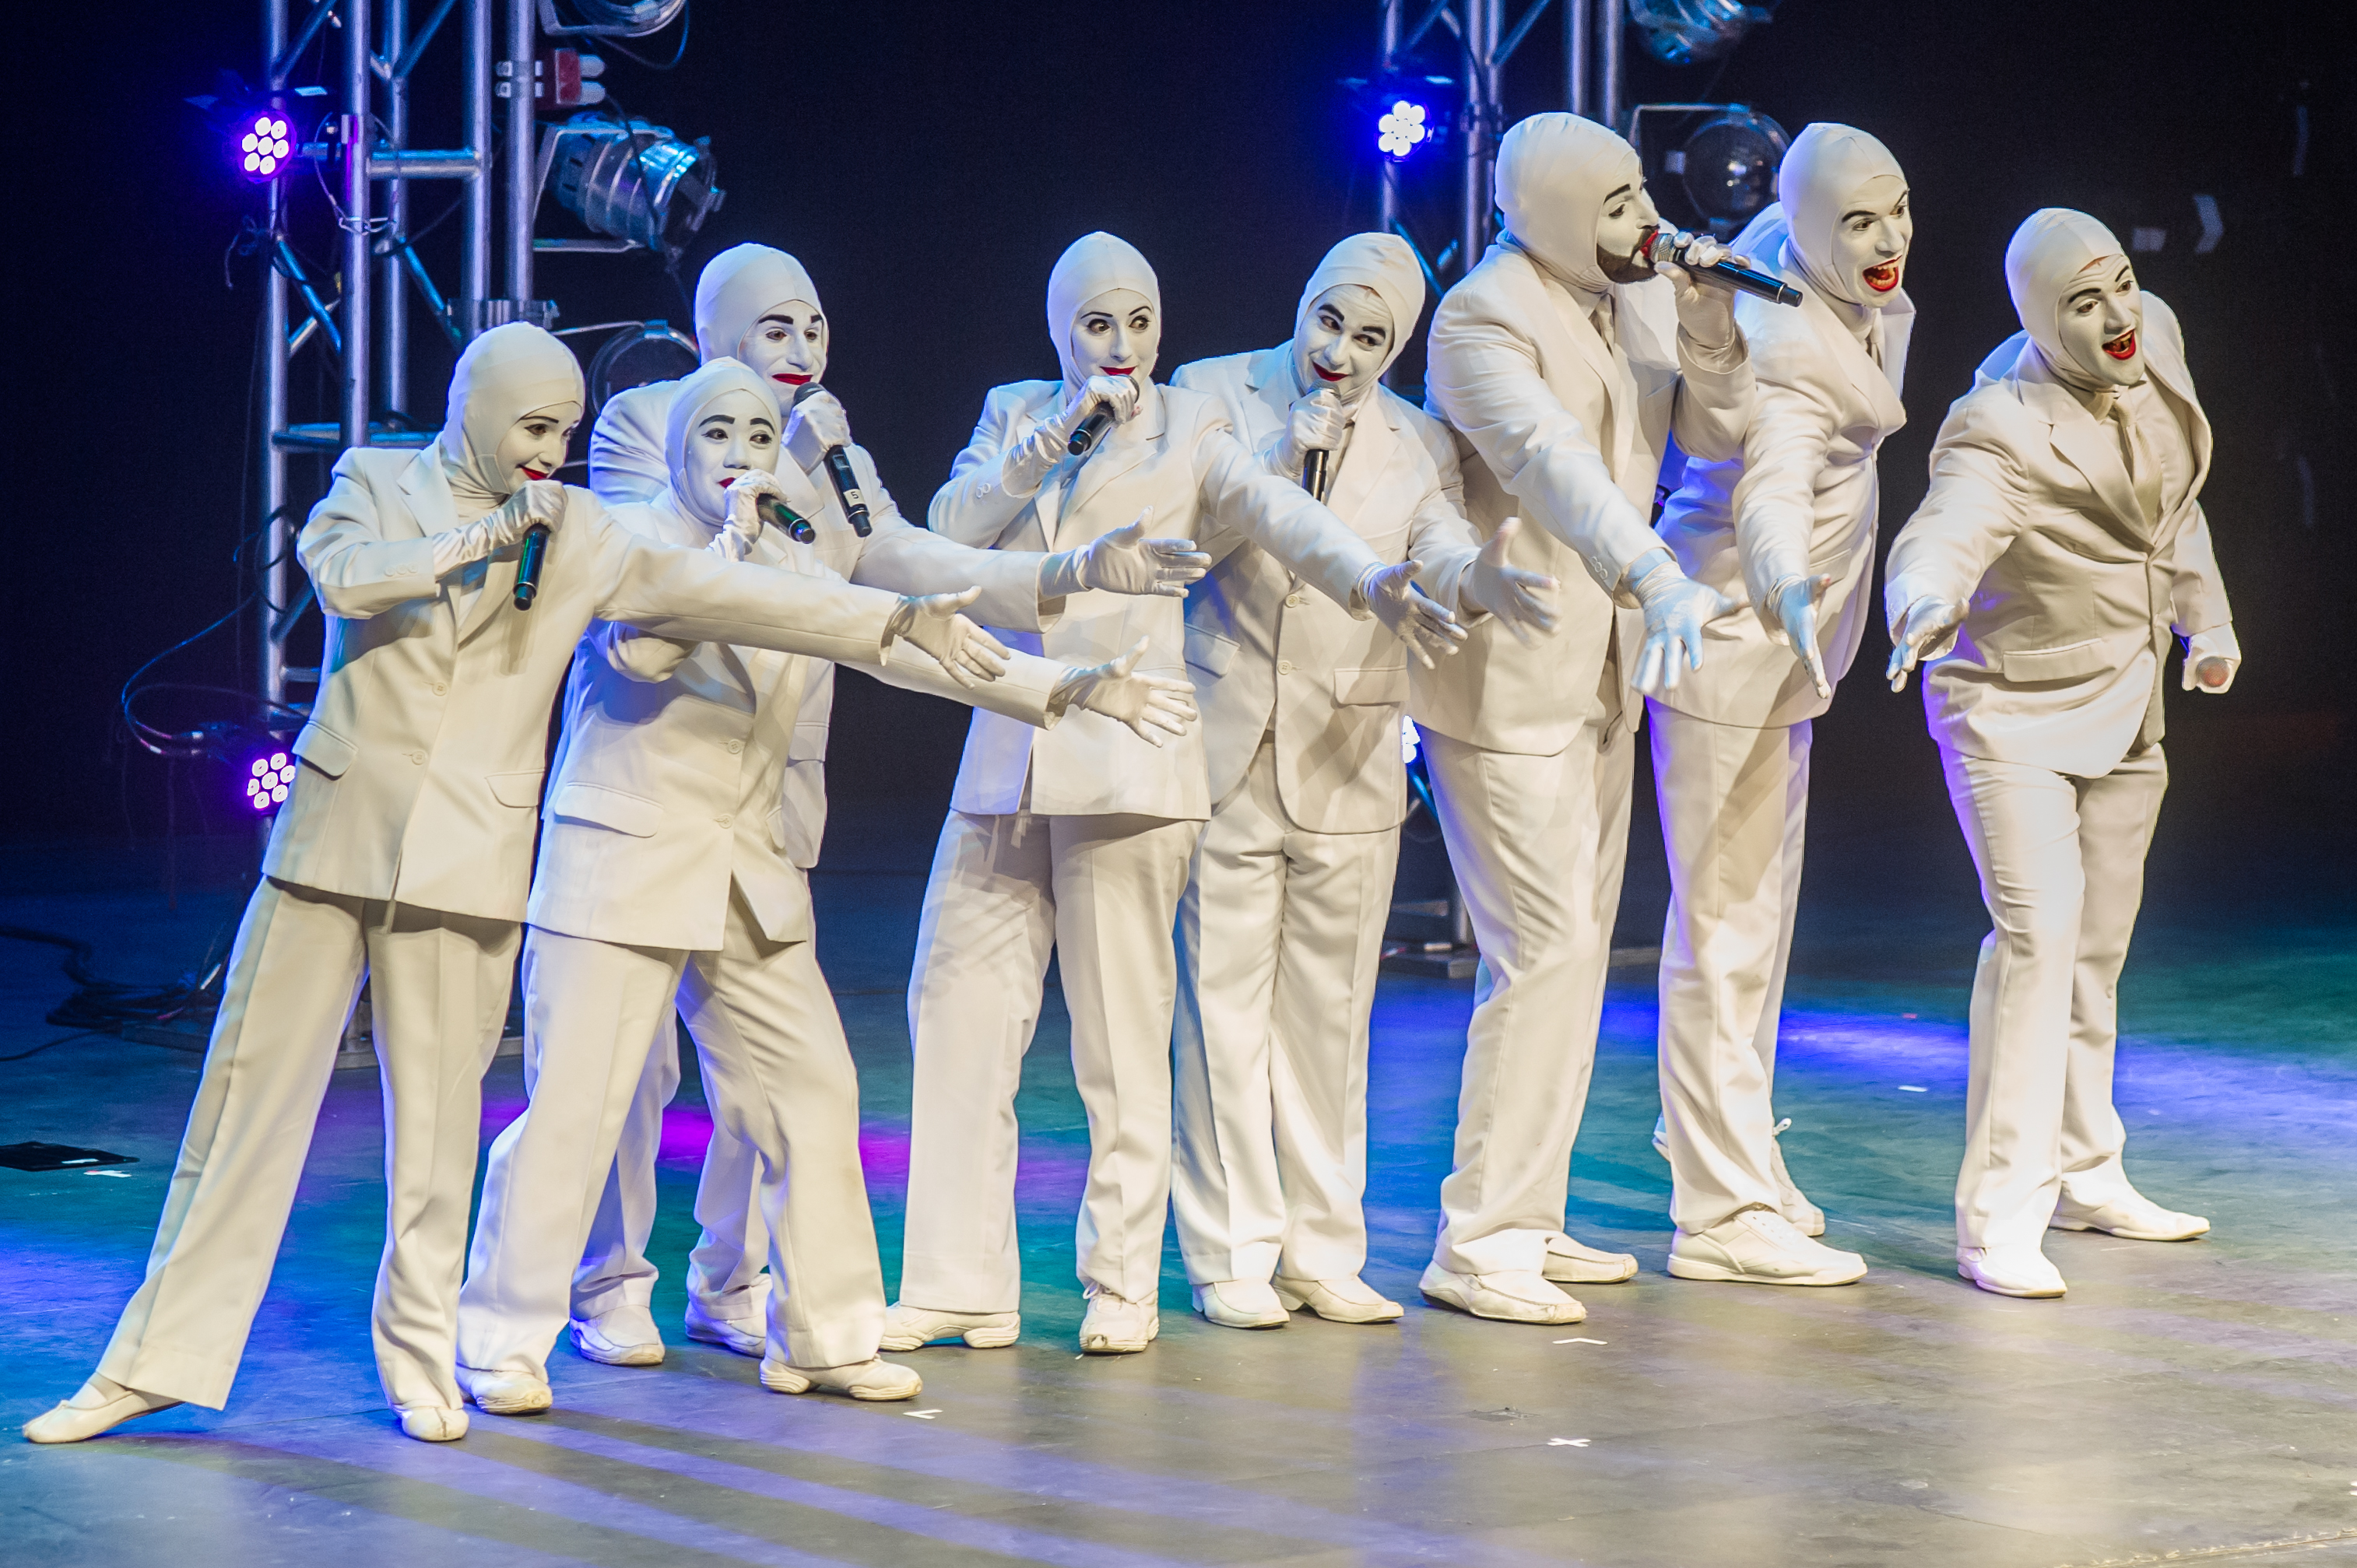 group of performers in white costumes posing on stage